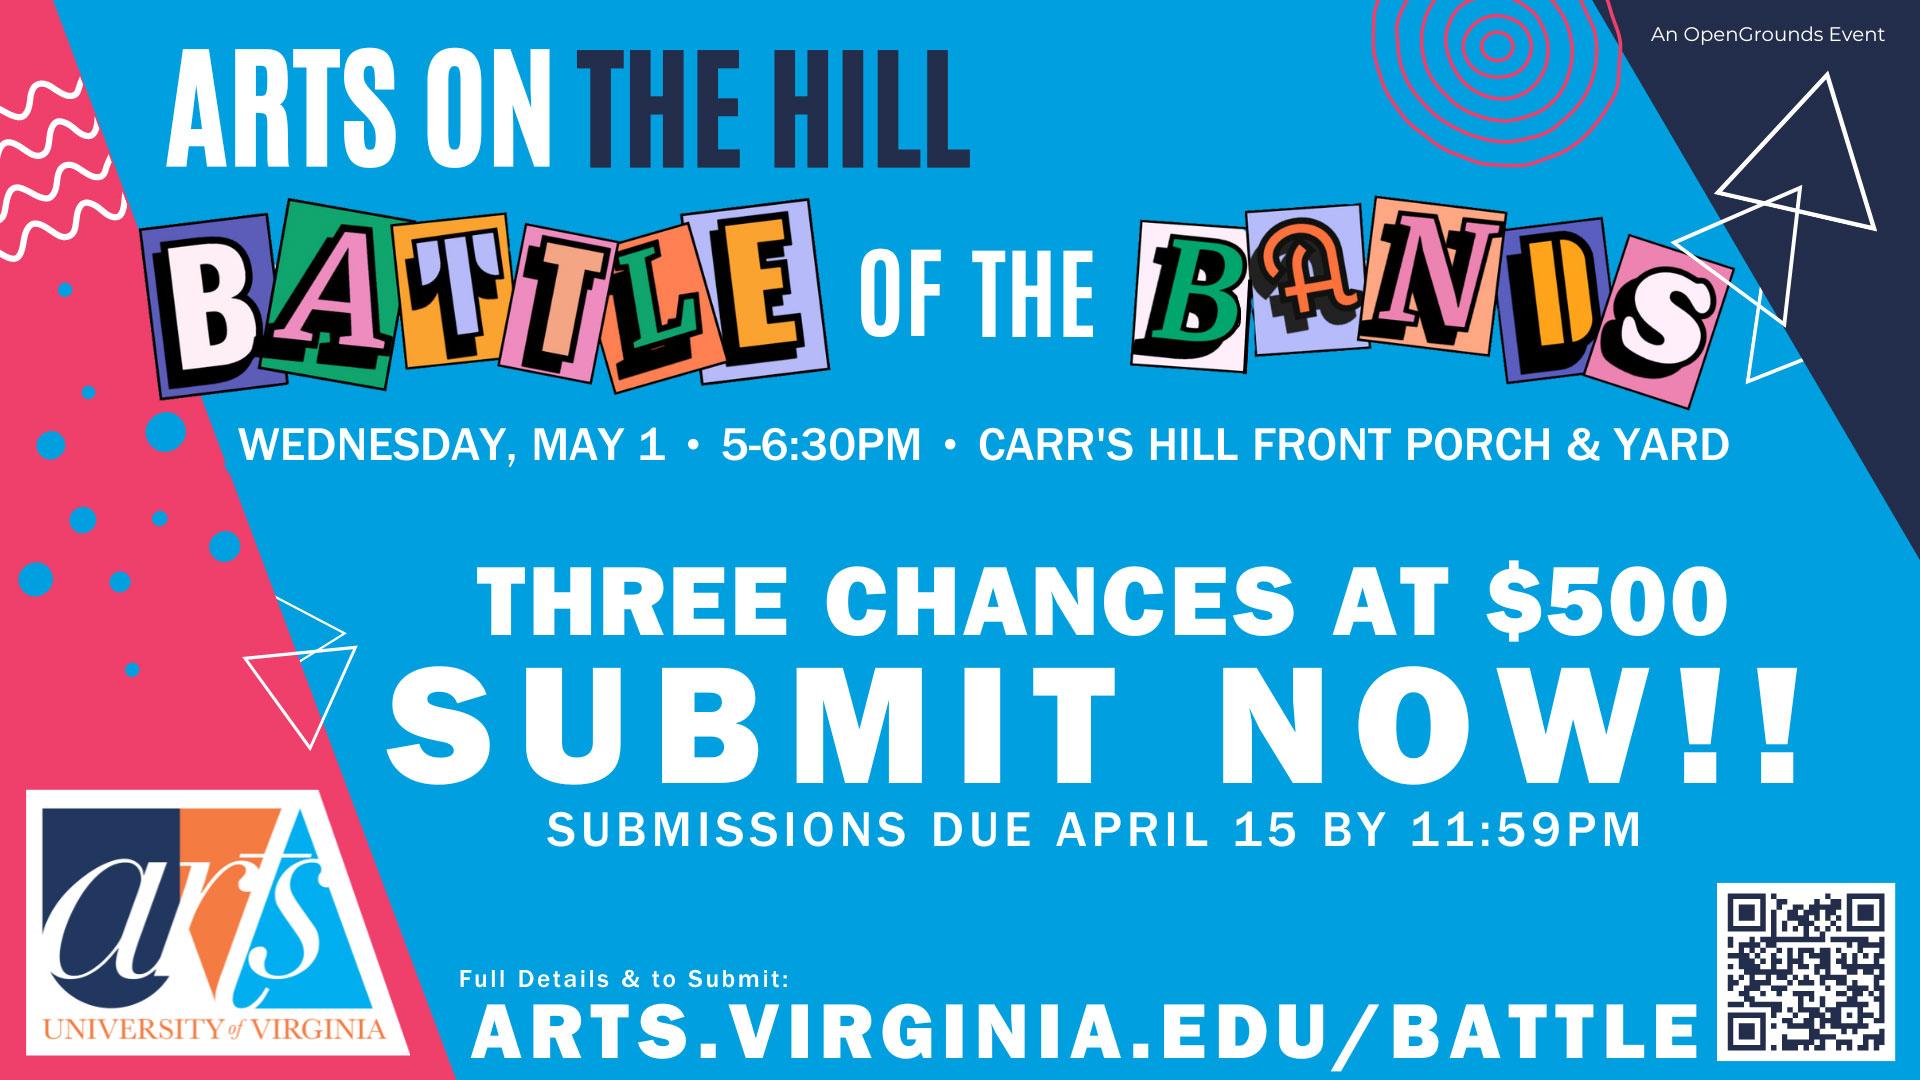 Battle of the Bands - Arts on the Hill